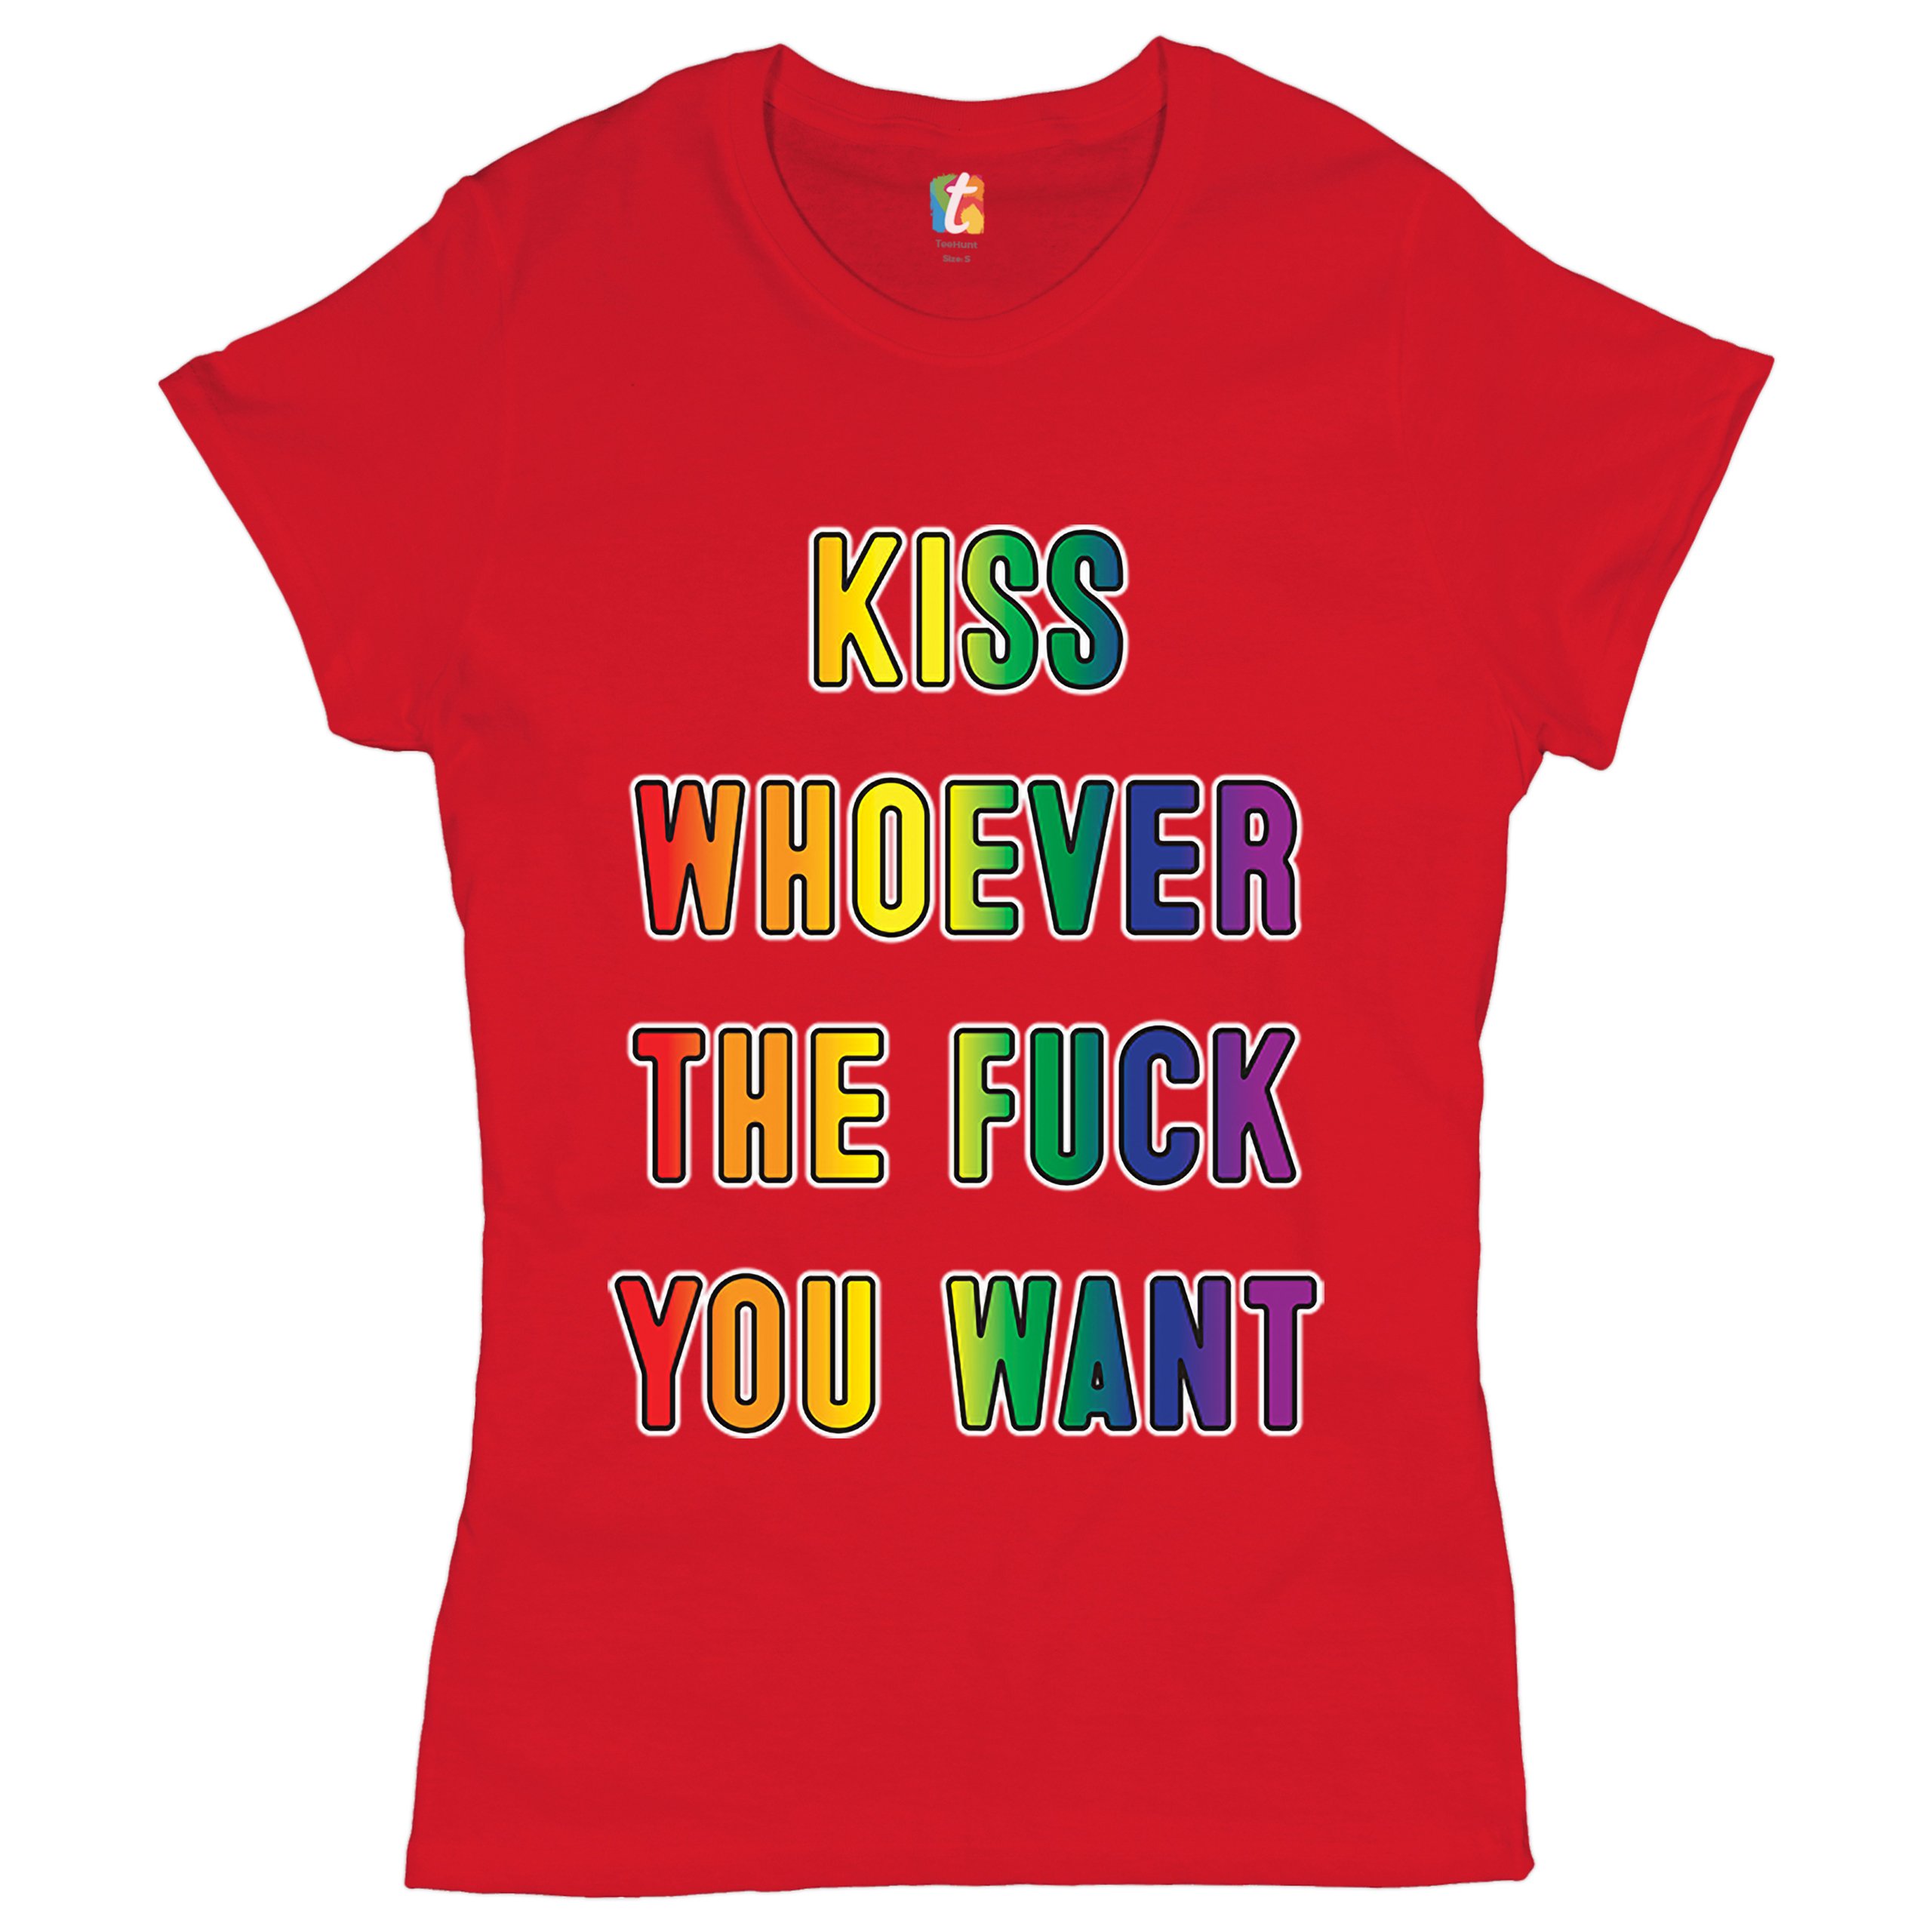 Kiss Whoever The Fk You Want T Shirt Lgbt Gay Pride Equality Womens Tee Ebay